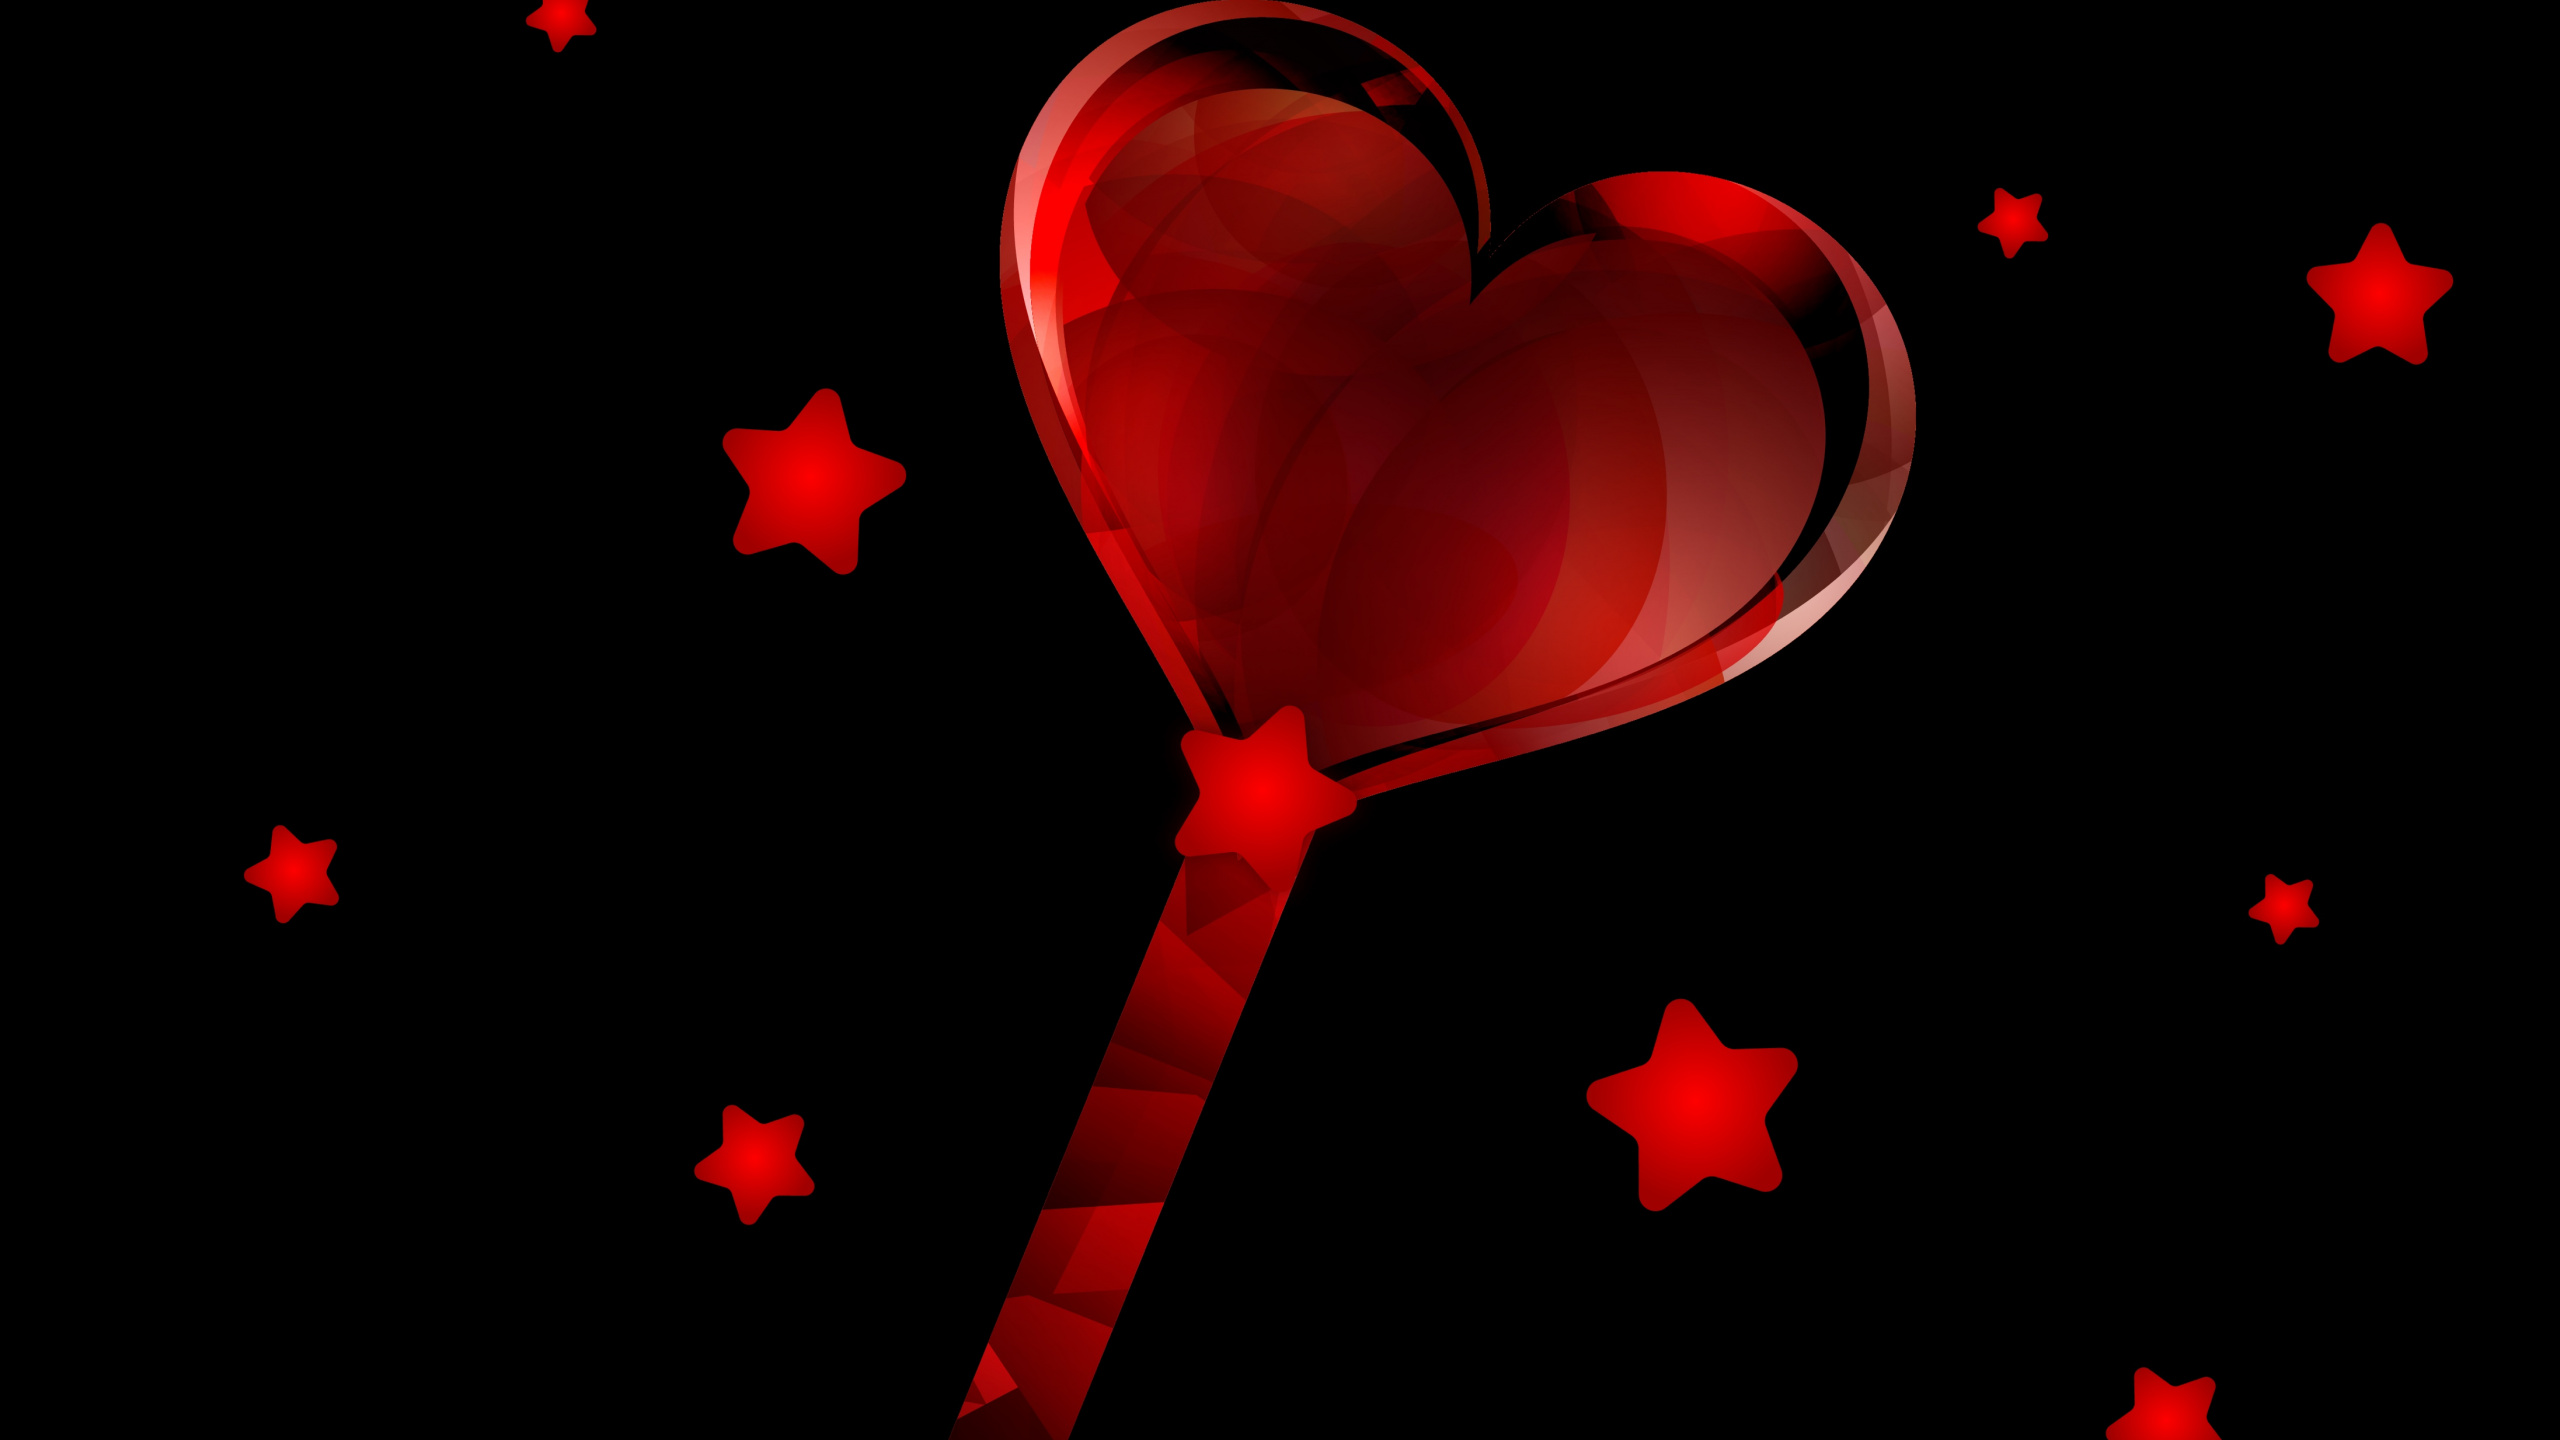 Heart, Red, Valentines Day, Love, Carmine. Wallpaper in 2560x1440 Resolution